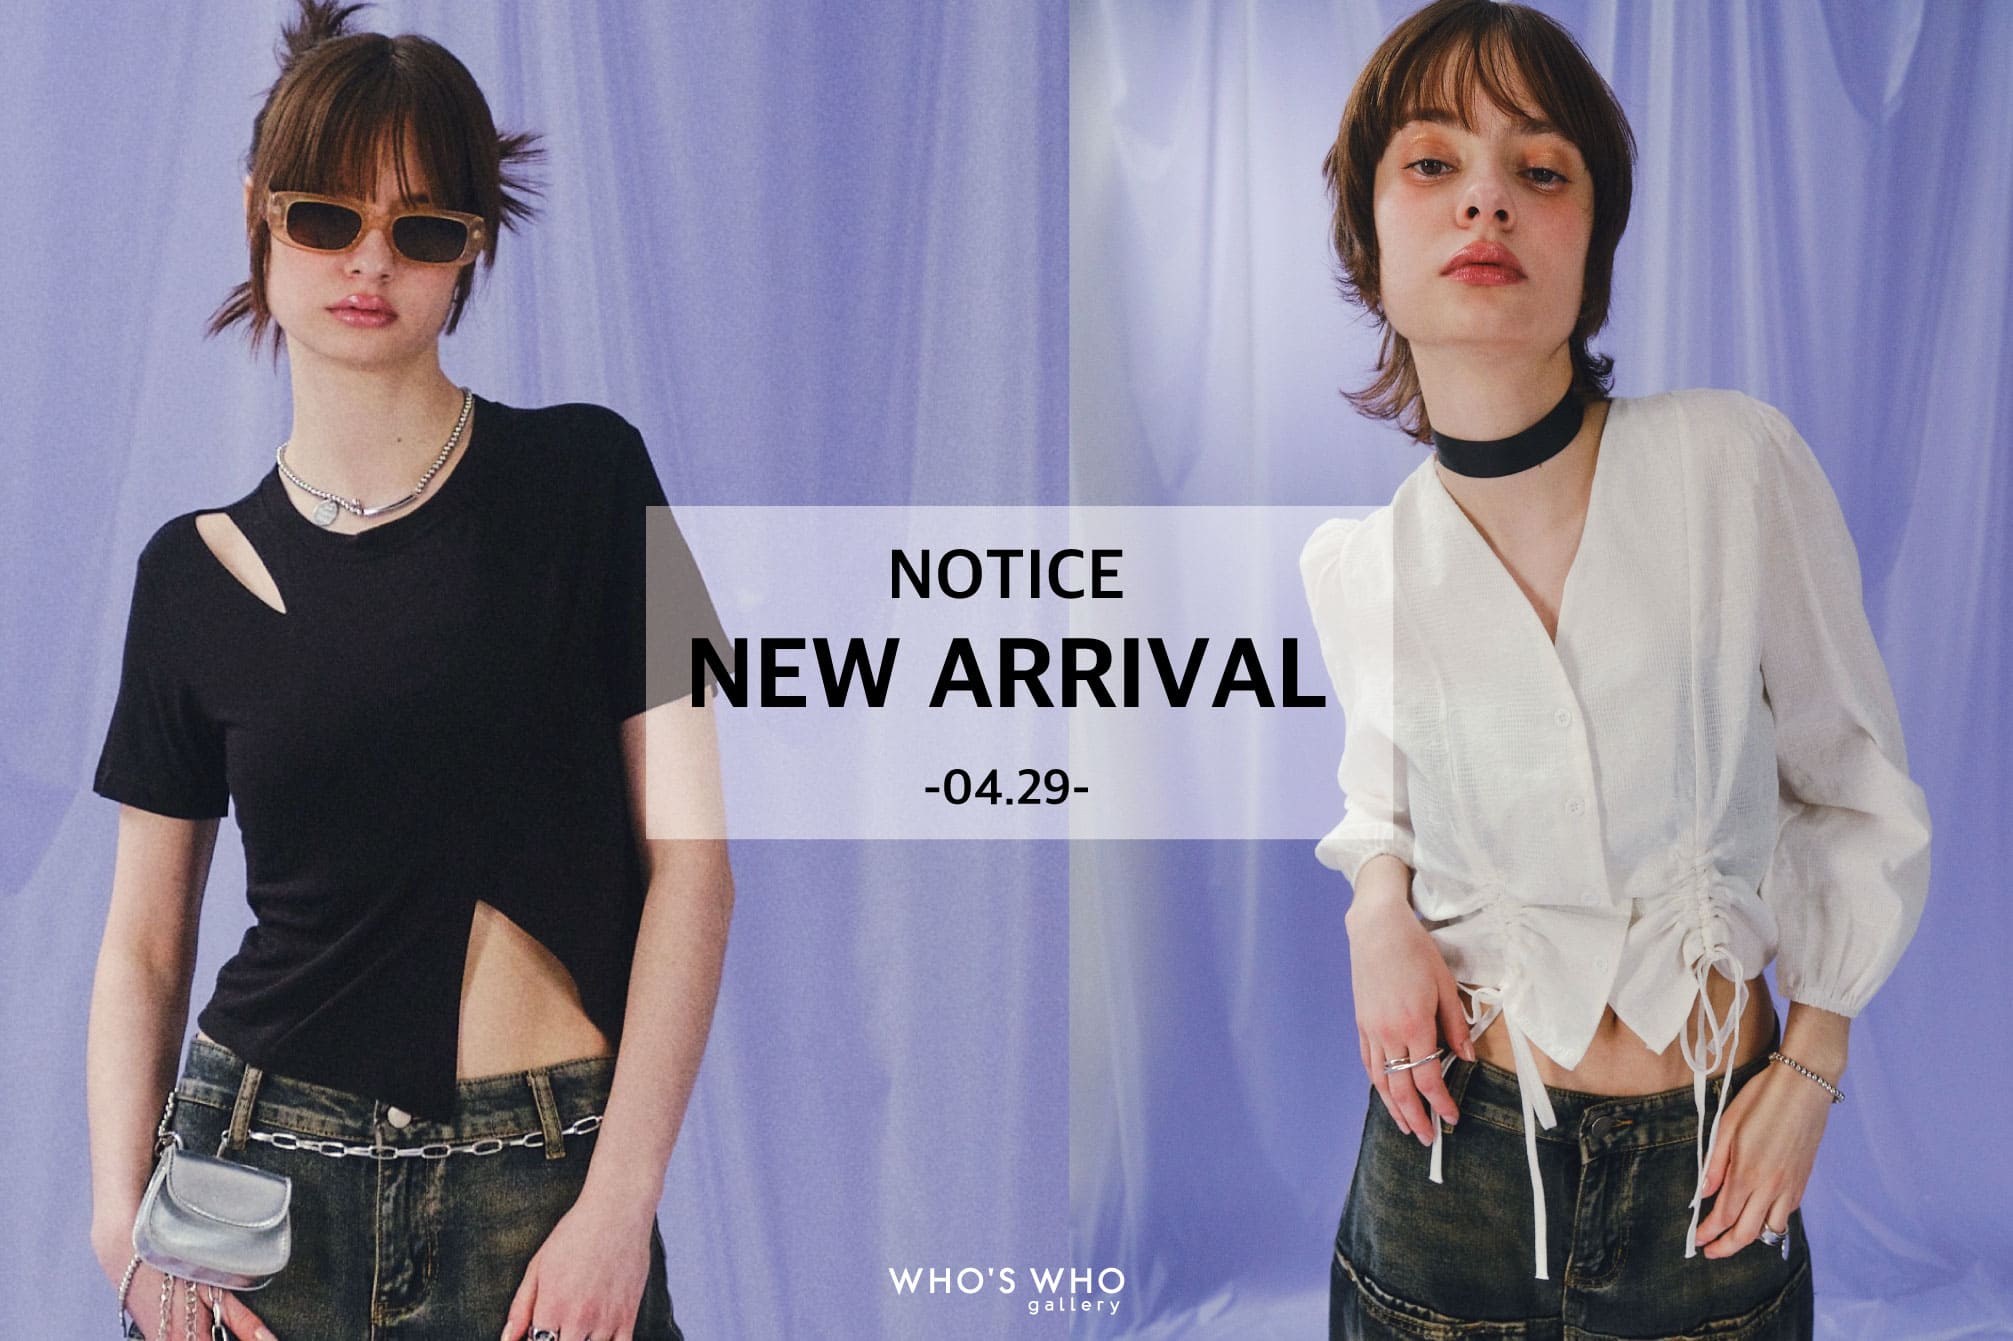 WHO’S WHO gallery 【NEW ARRIVAL NOTICE-04.29-】